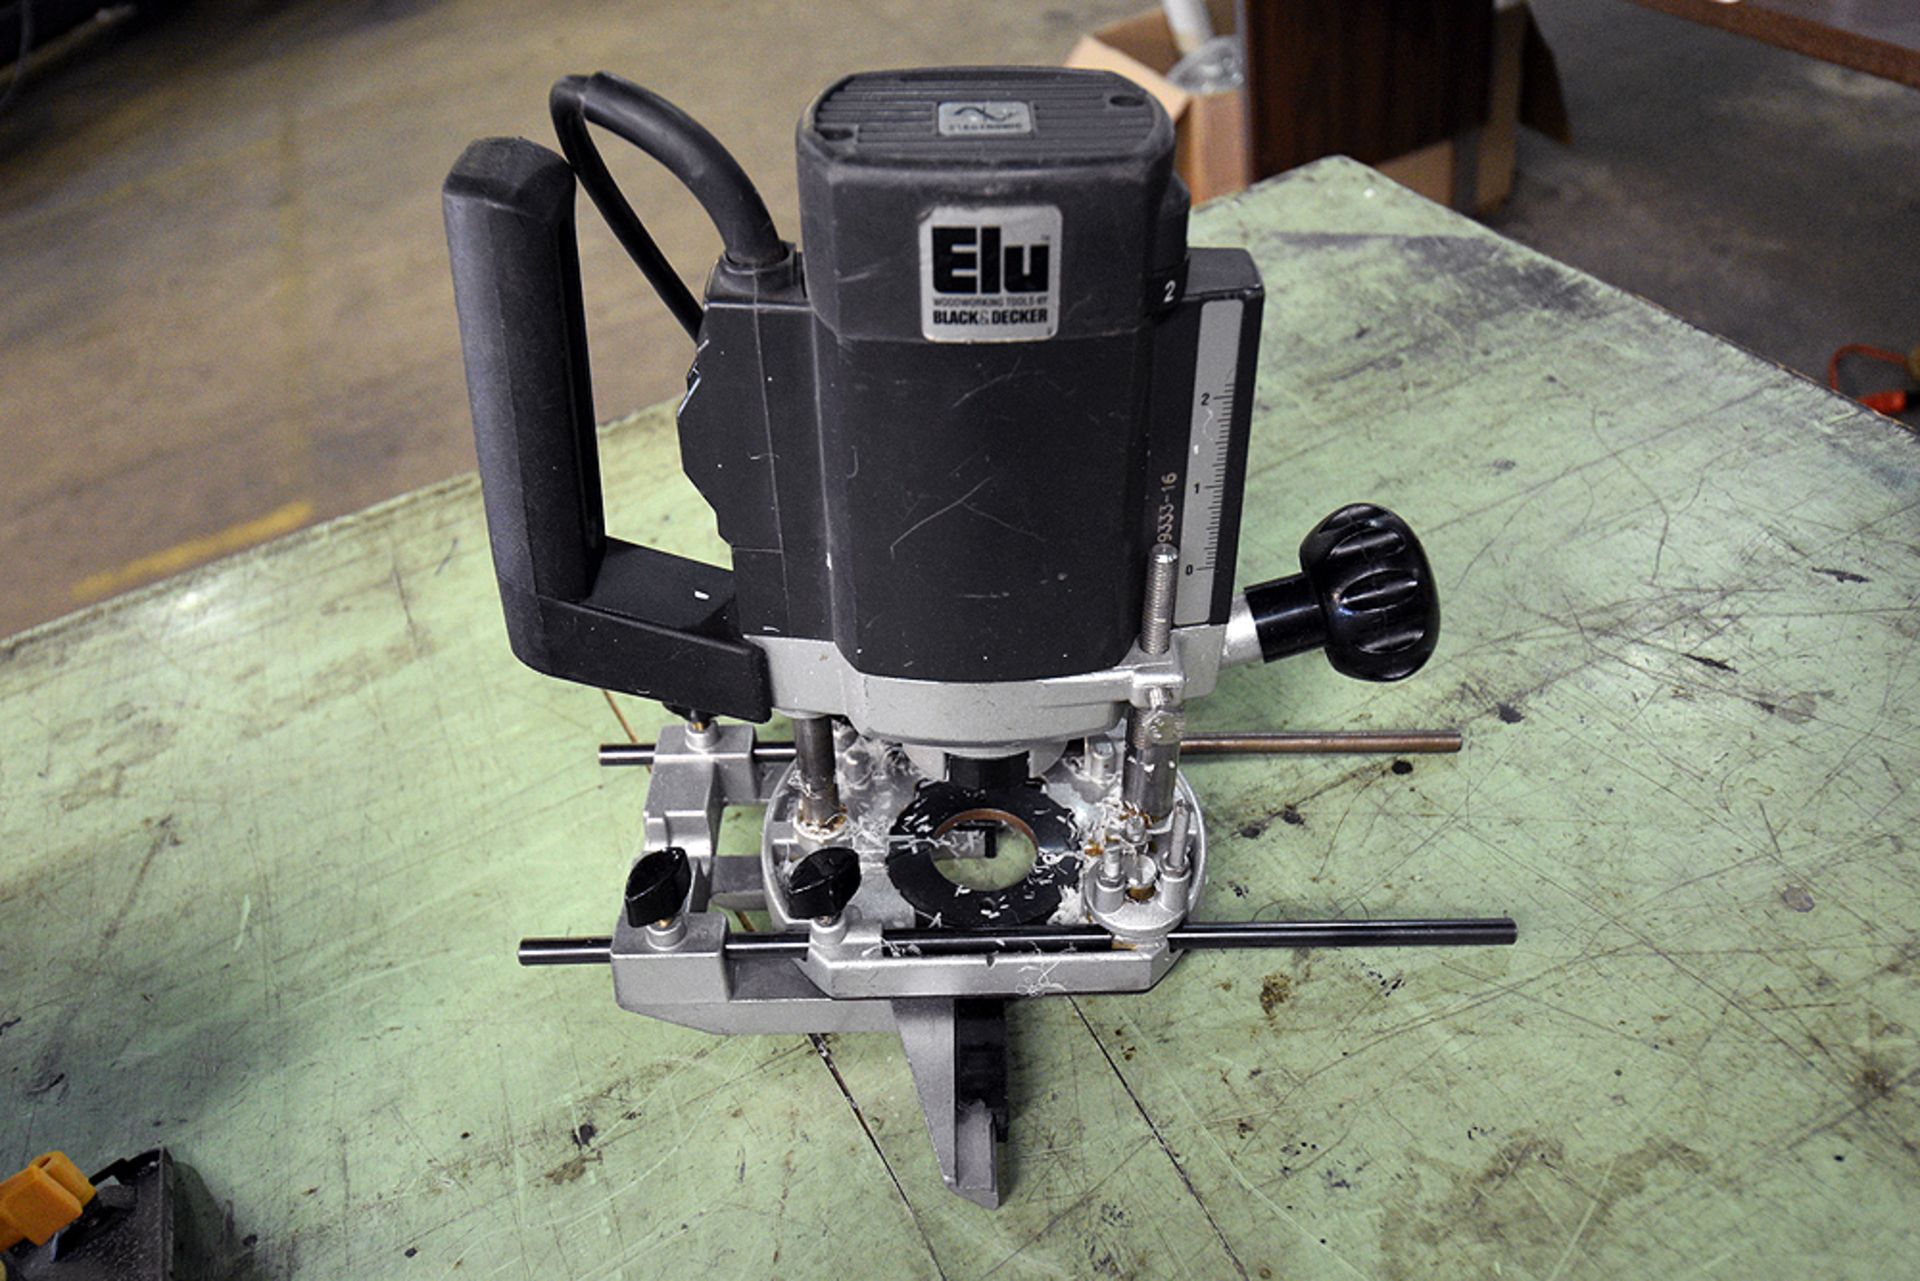 (1) Chicago 7 1/4" Circular Saw and (1) Black & Decker/ELU mod 3304 Plunge Cut Router - Image 3 of 3